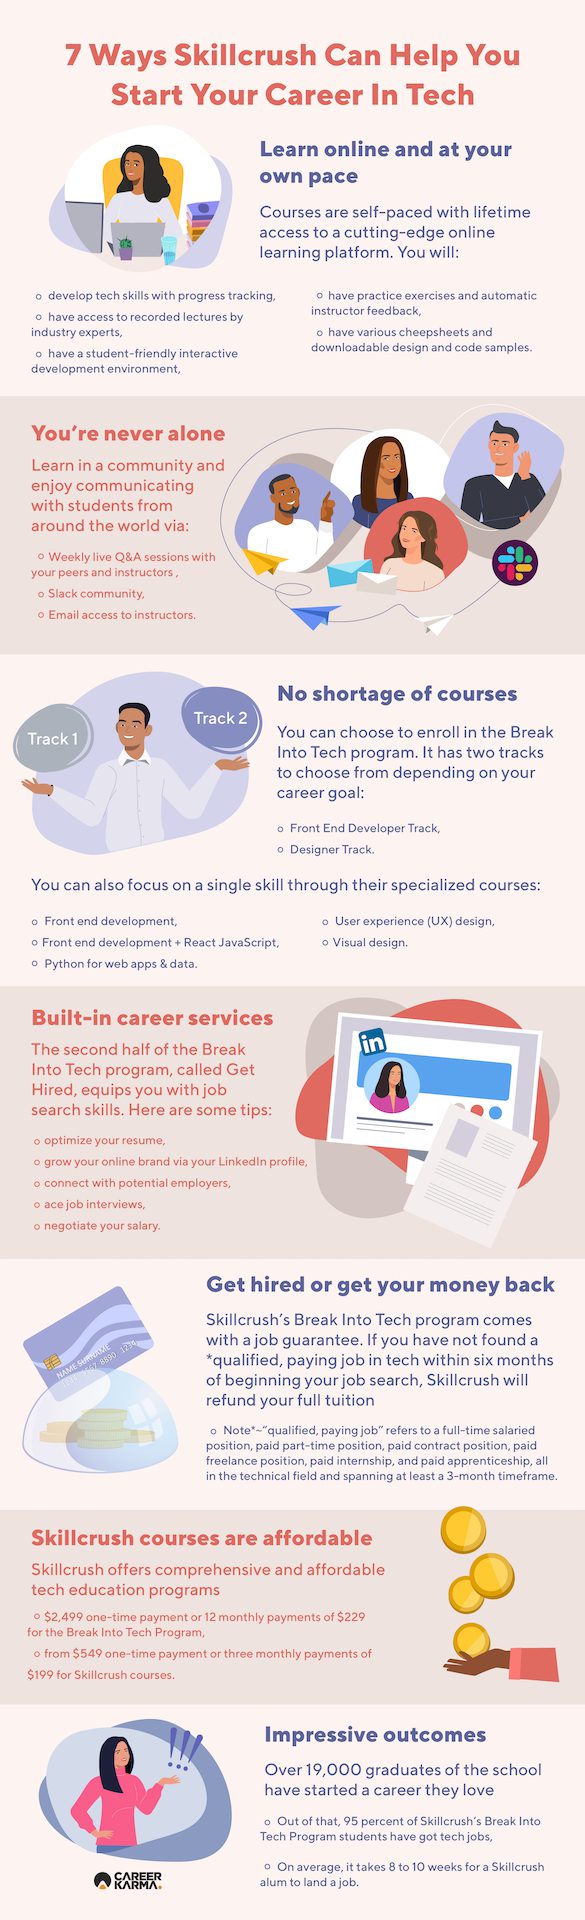 7 Ways Skillcrush Can Help You Start Your Career In Tech 1